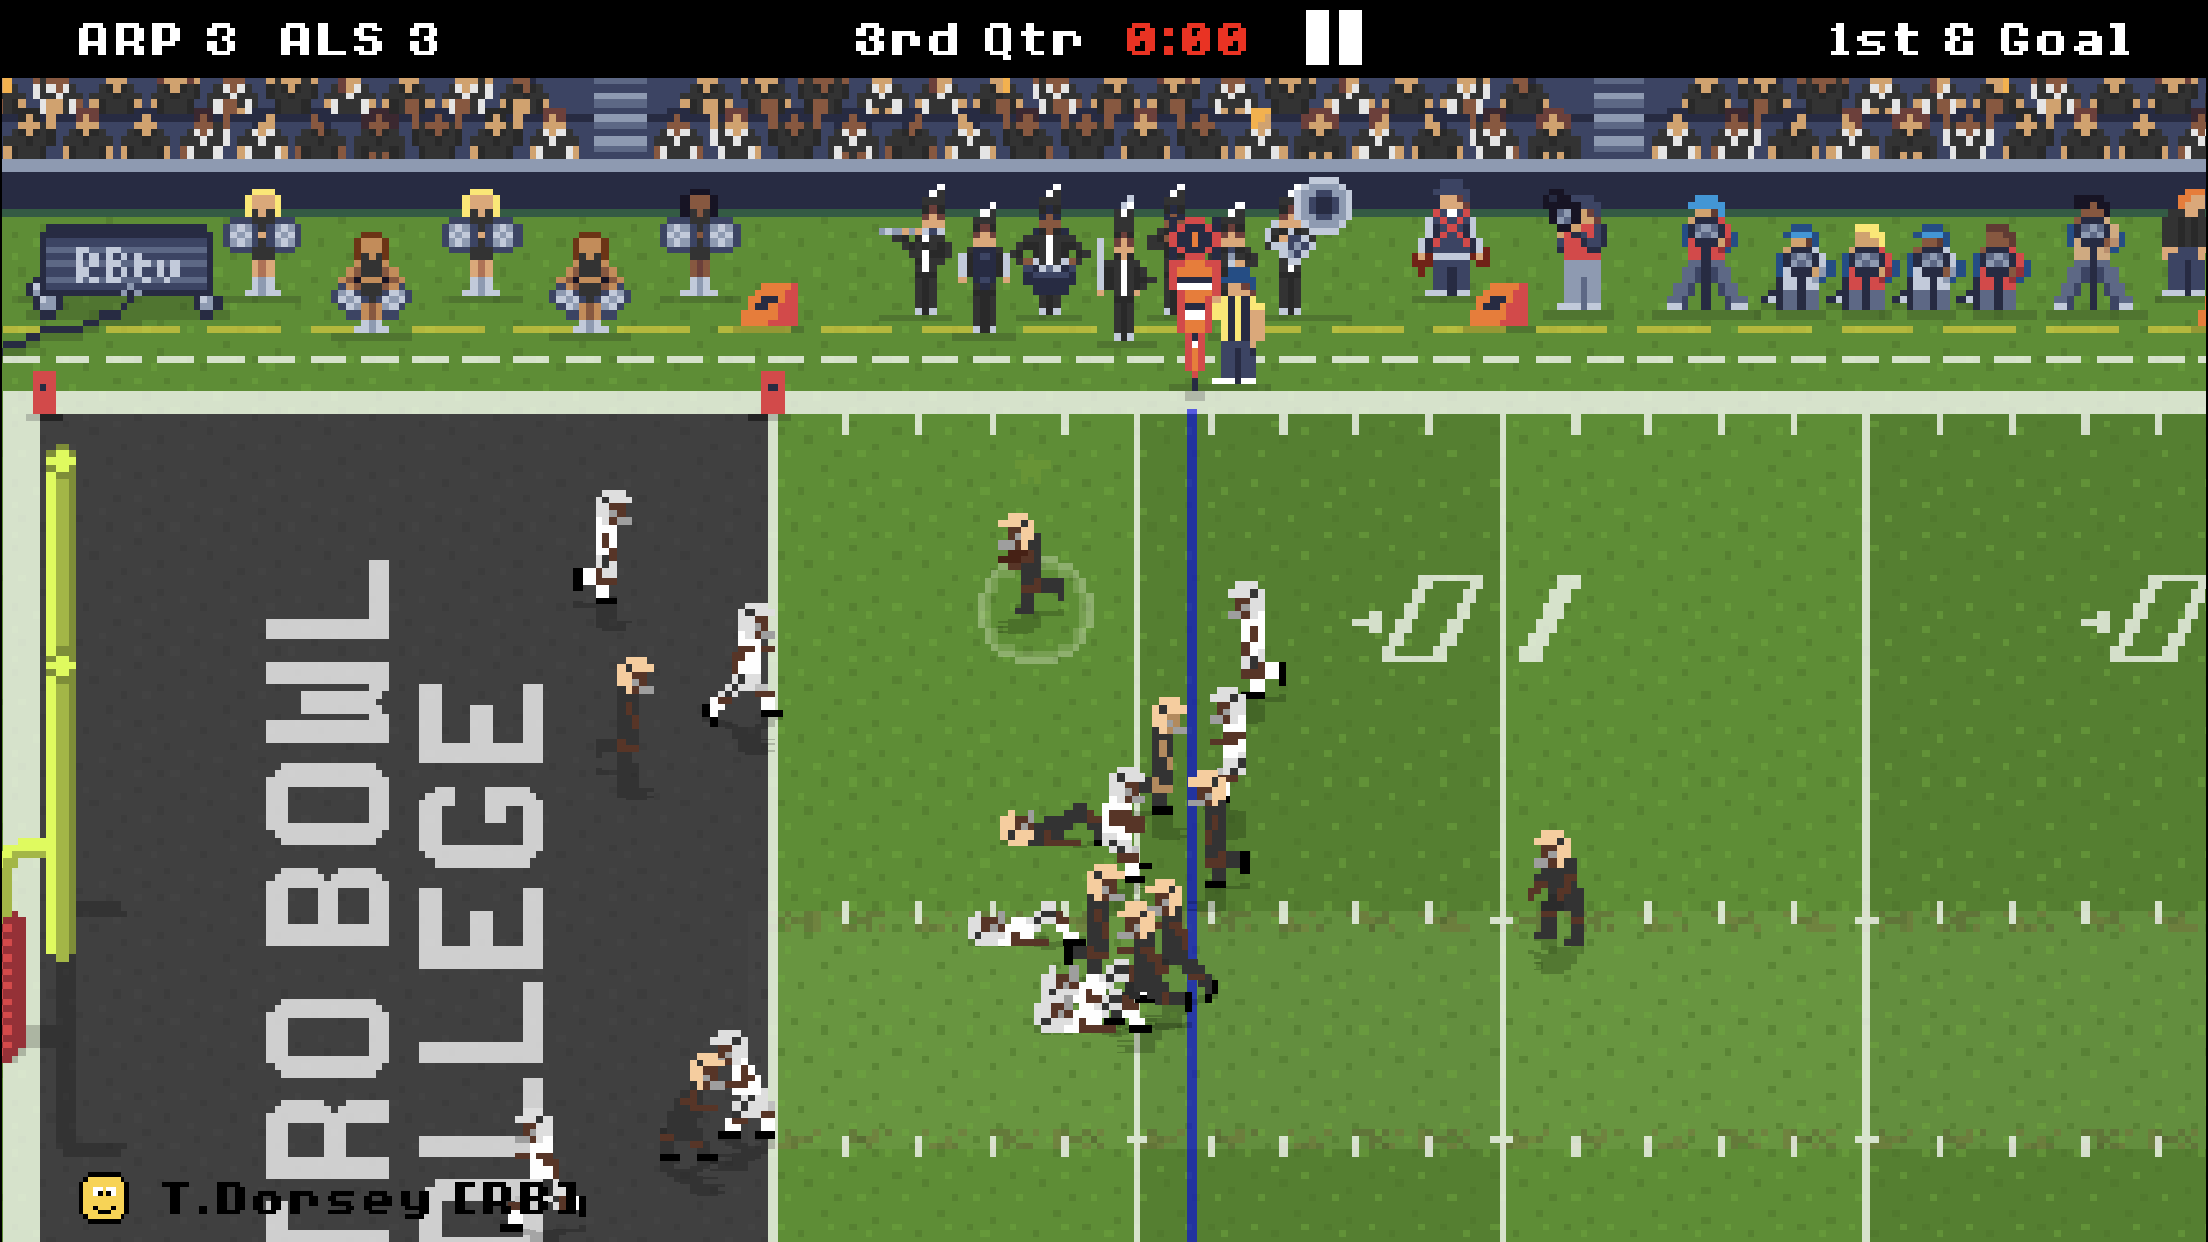 Play Retro Bowl Online for Free on PC & Mobile